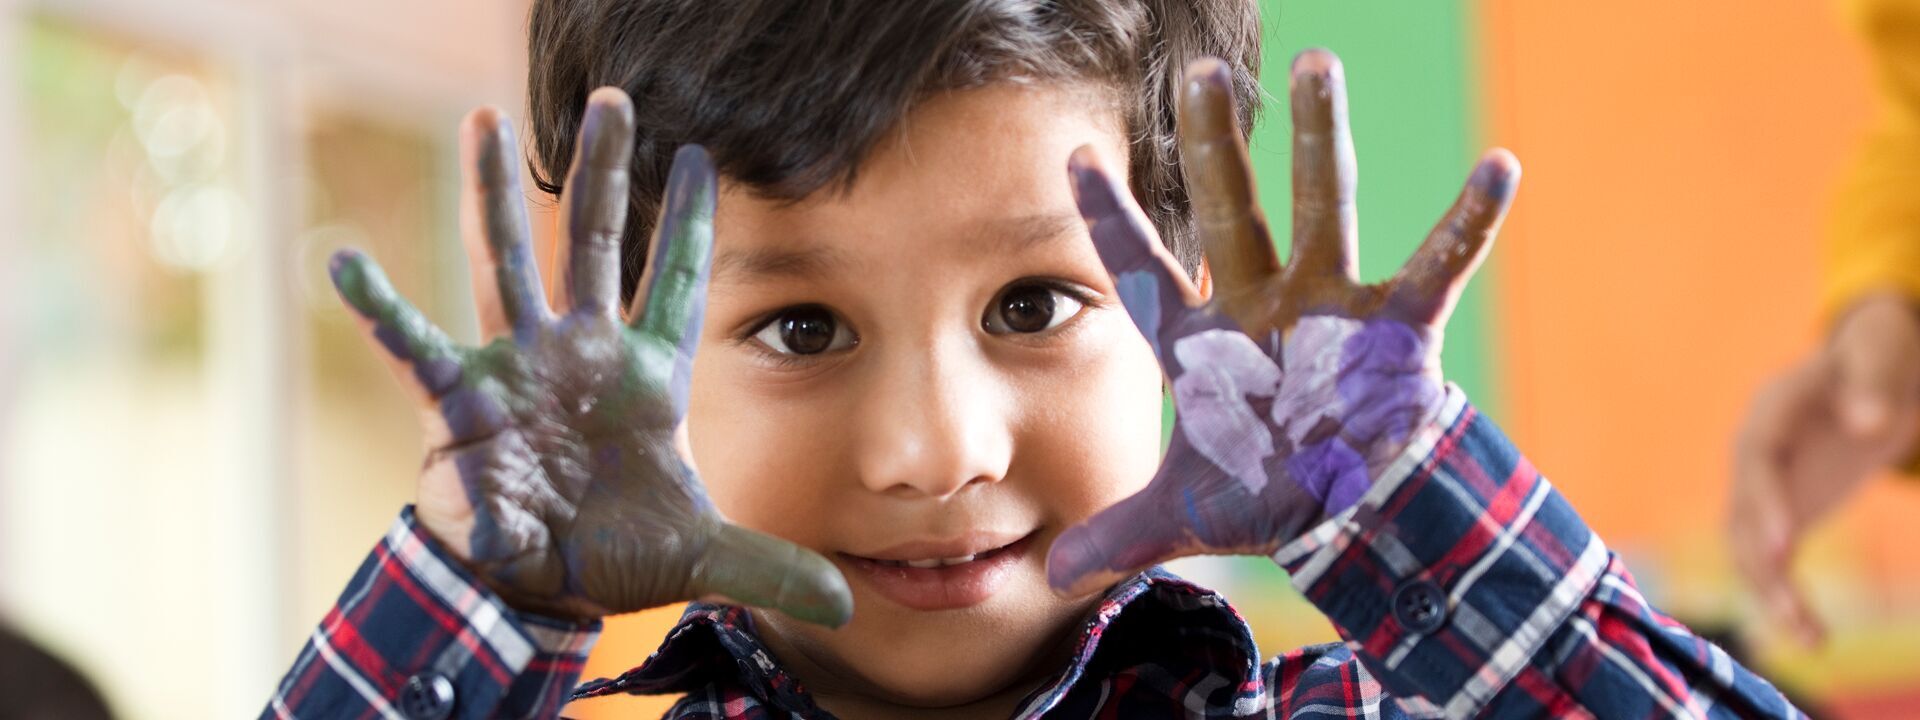 Preschool boy showing his painted palm of hands